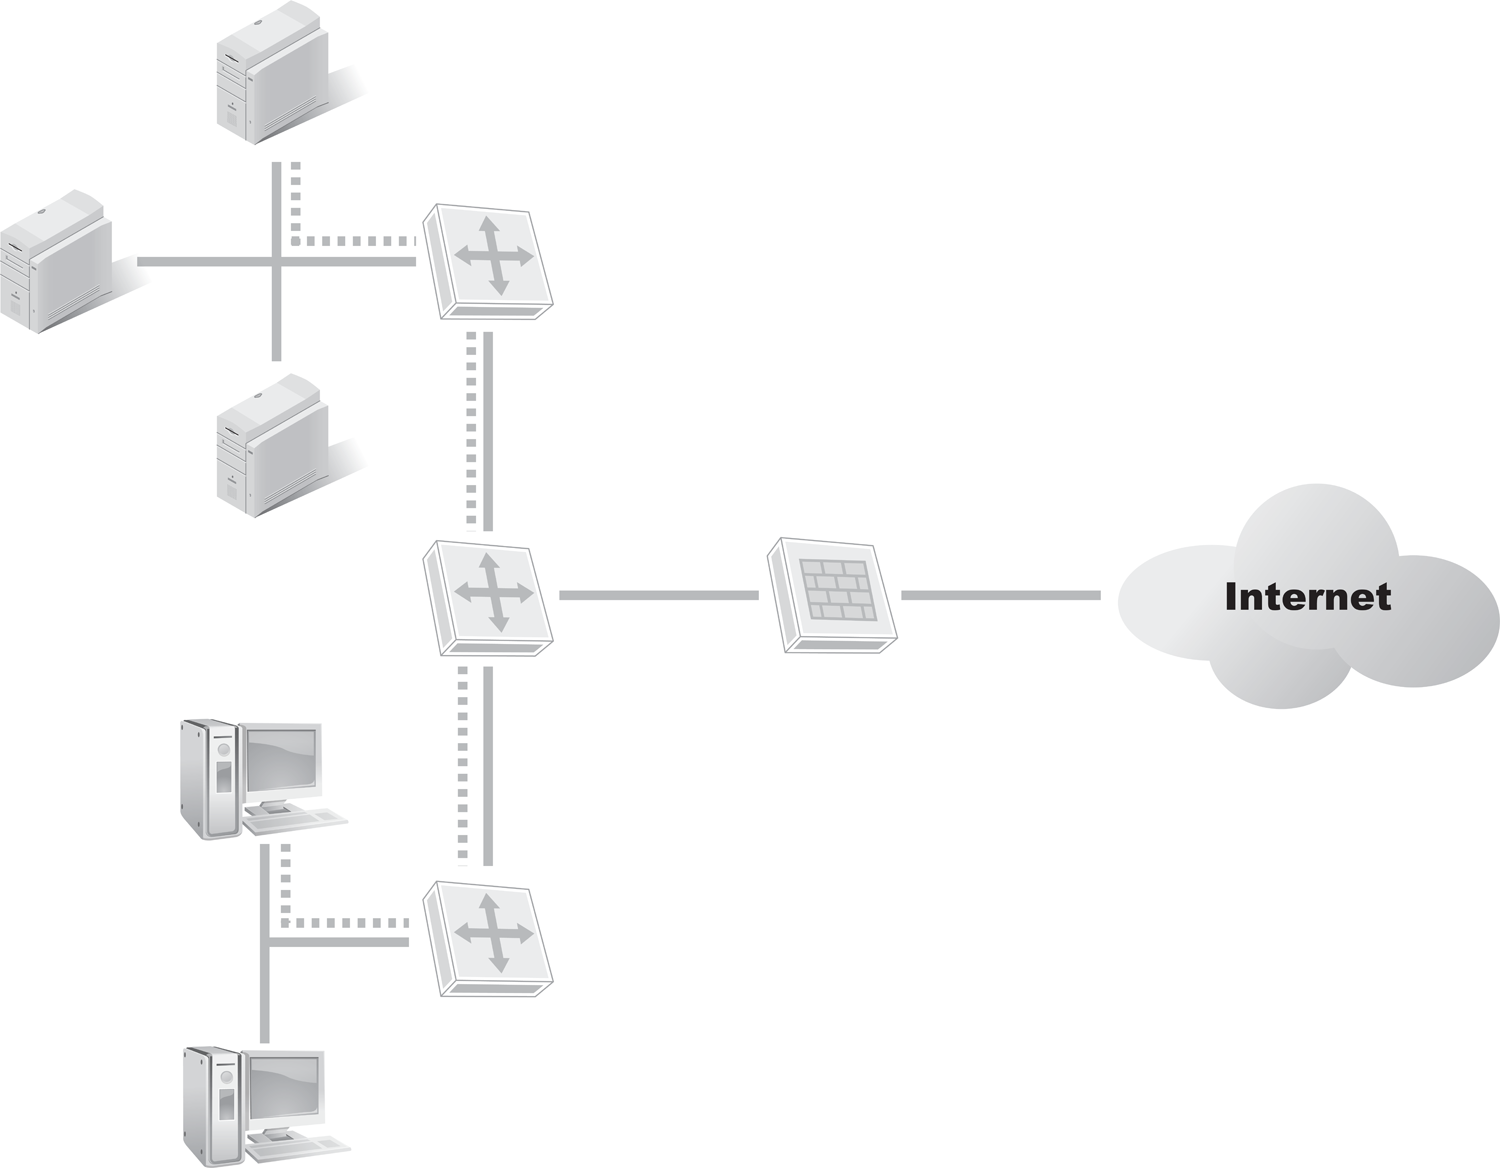 A diagram of a border firewall for two network segments.